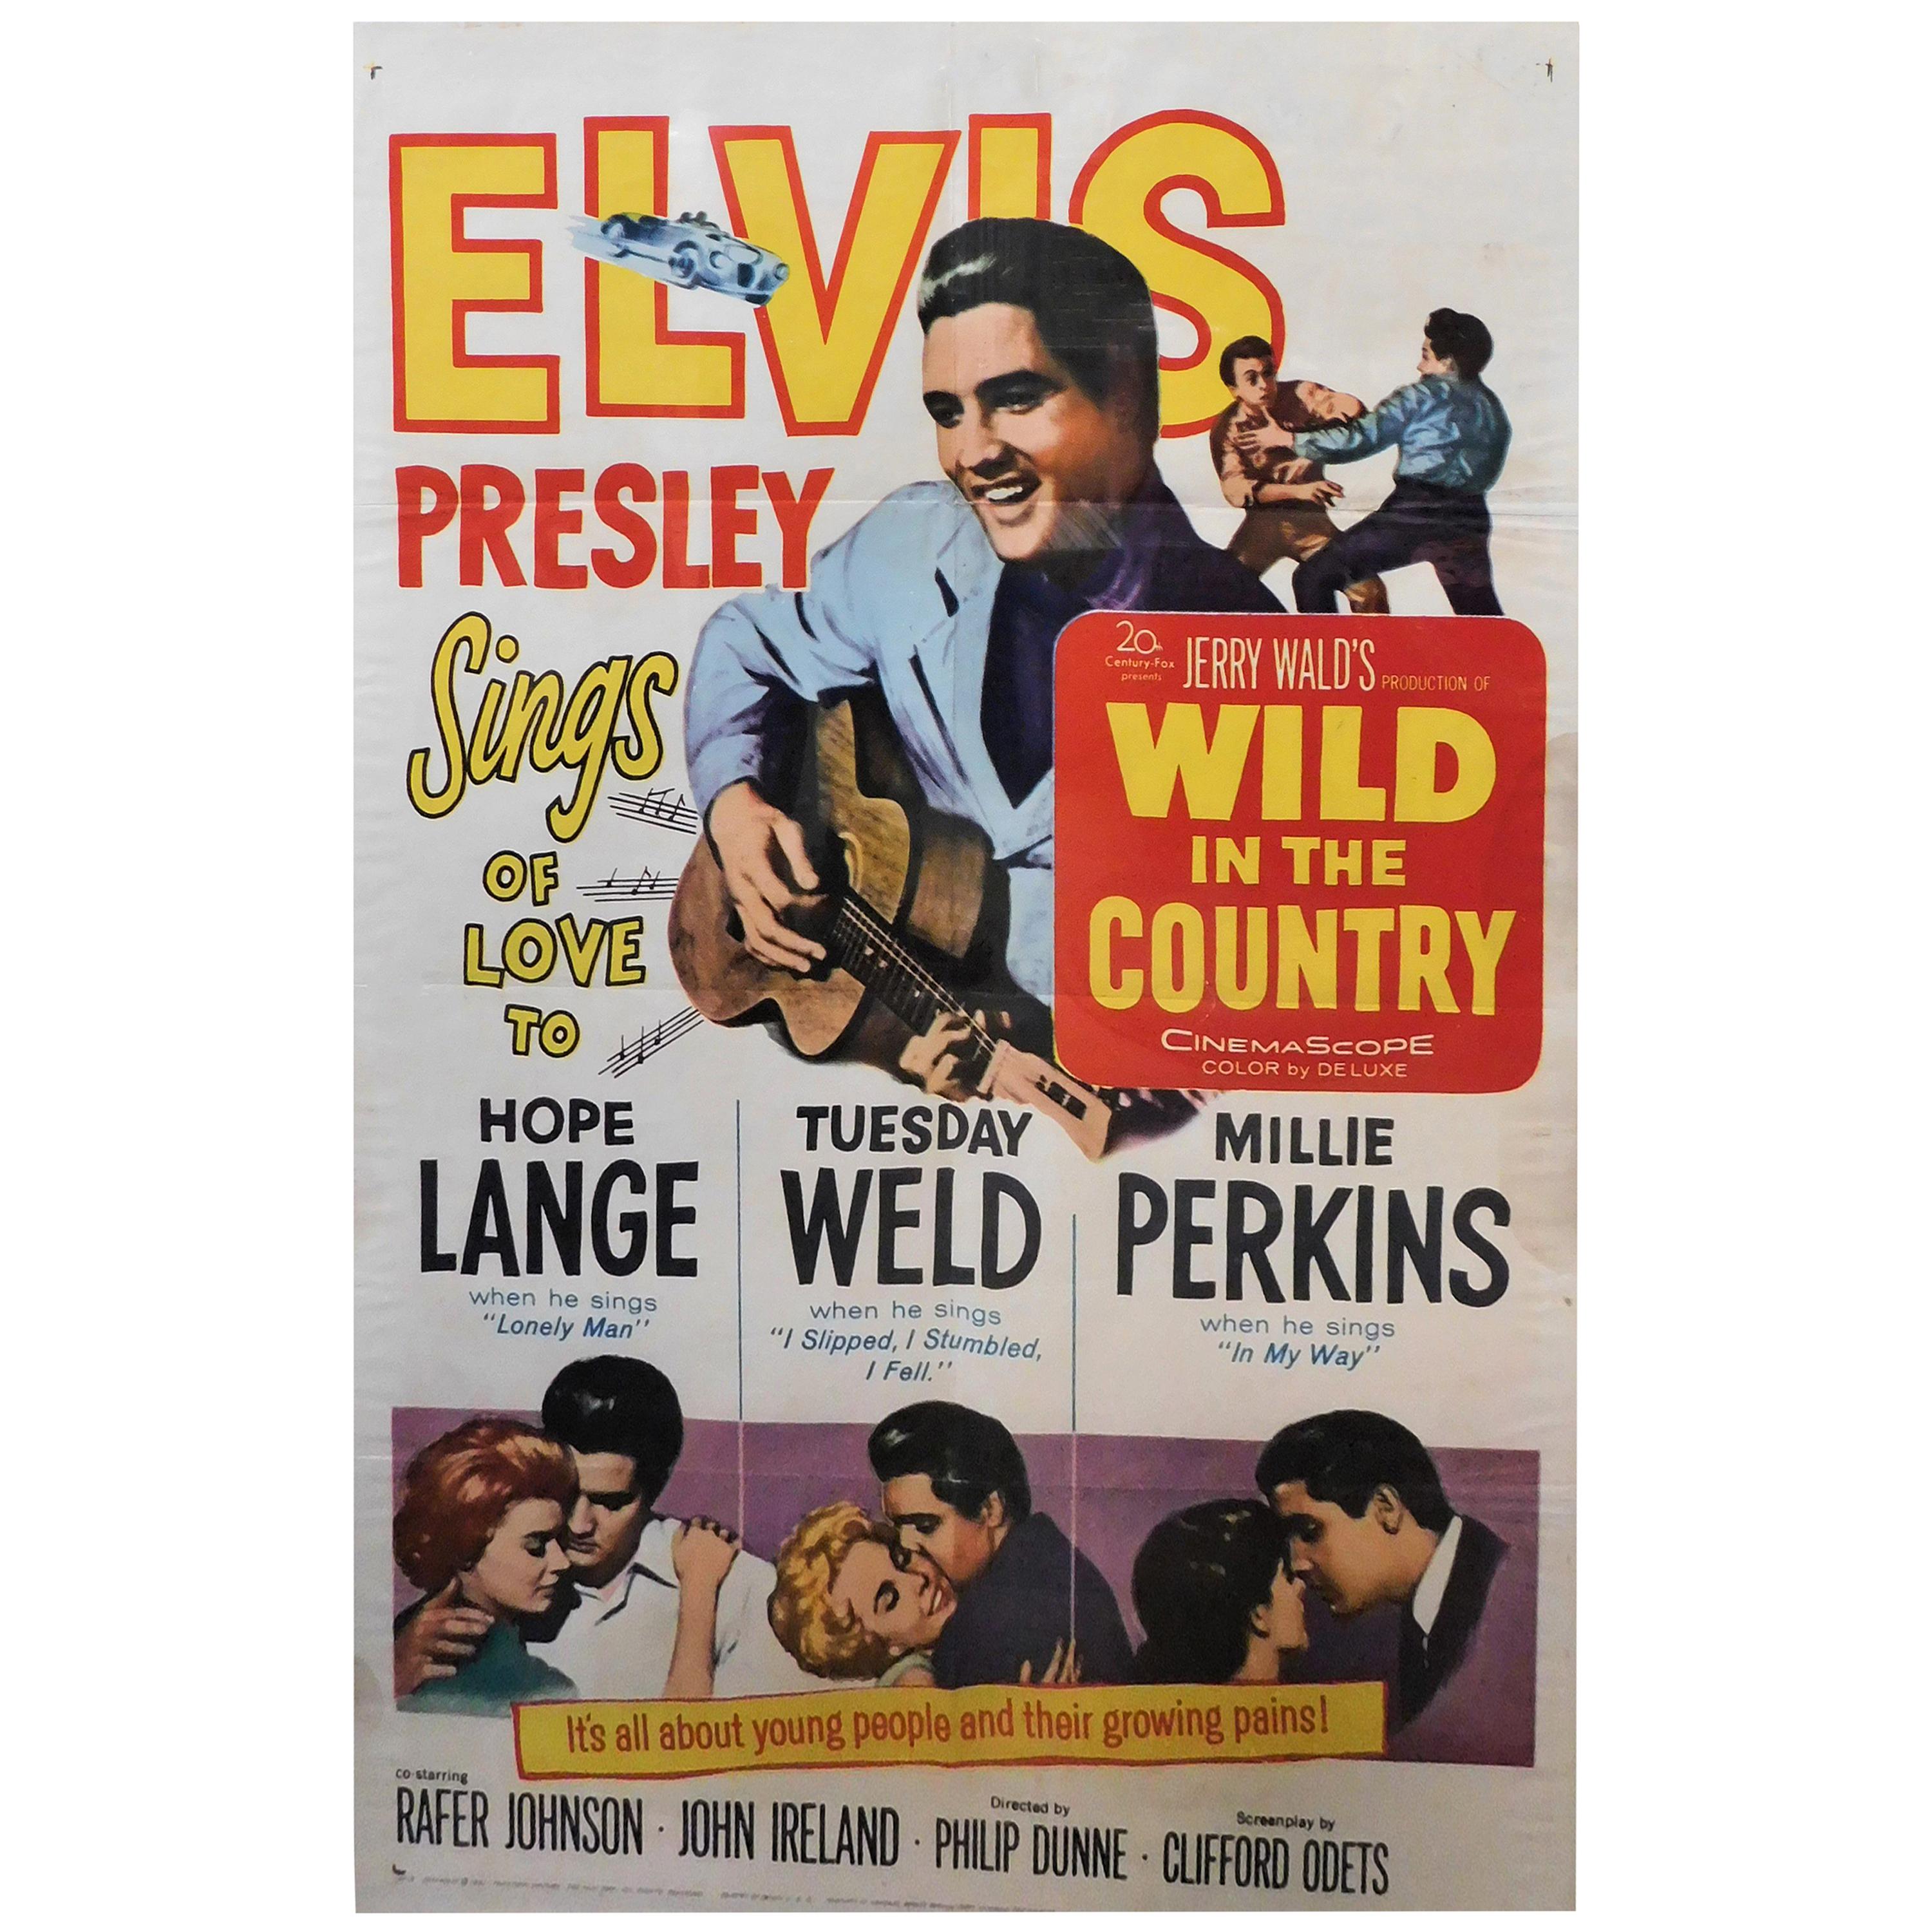 Wild in the Country Elvis Presley 1961 Original Theatrical Poster